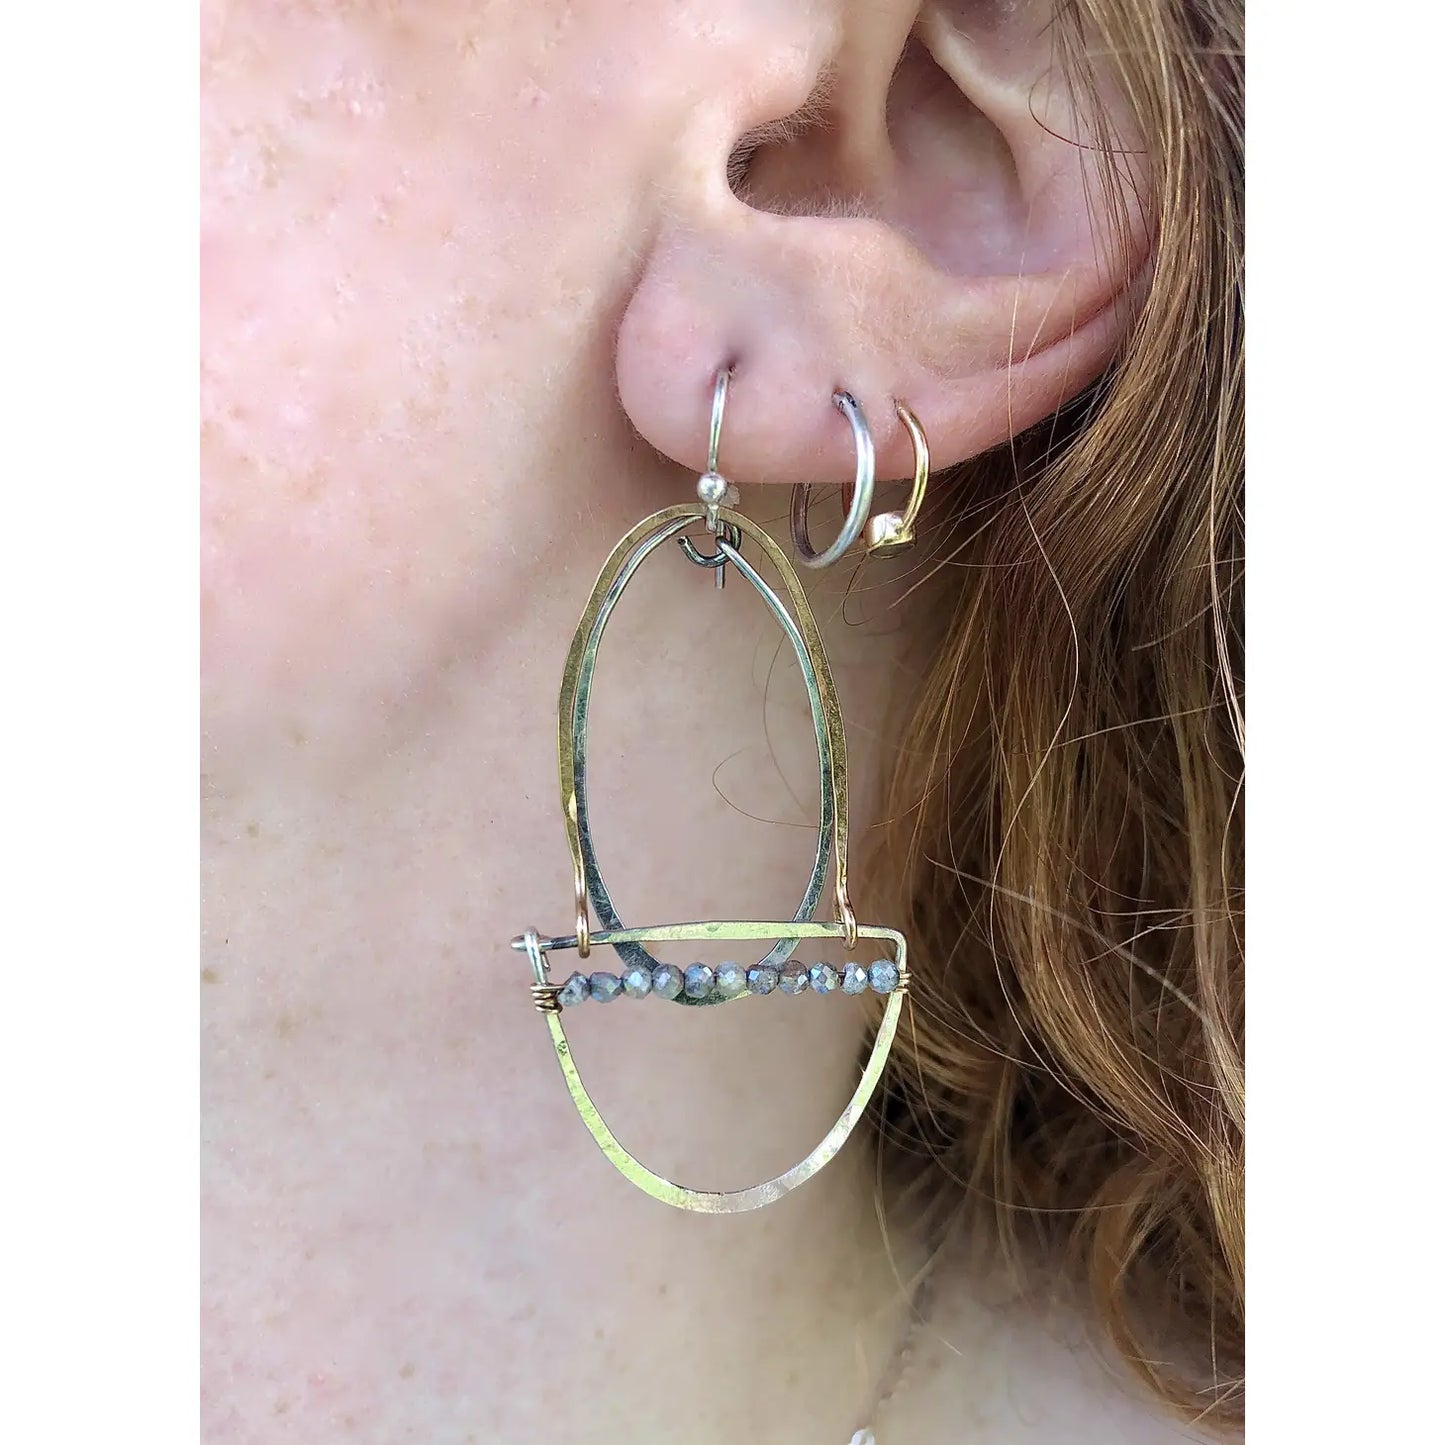 Art By Any Means Moonstone Moonphase Earrings